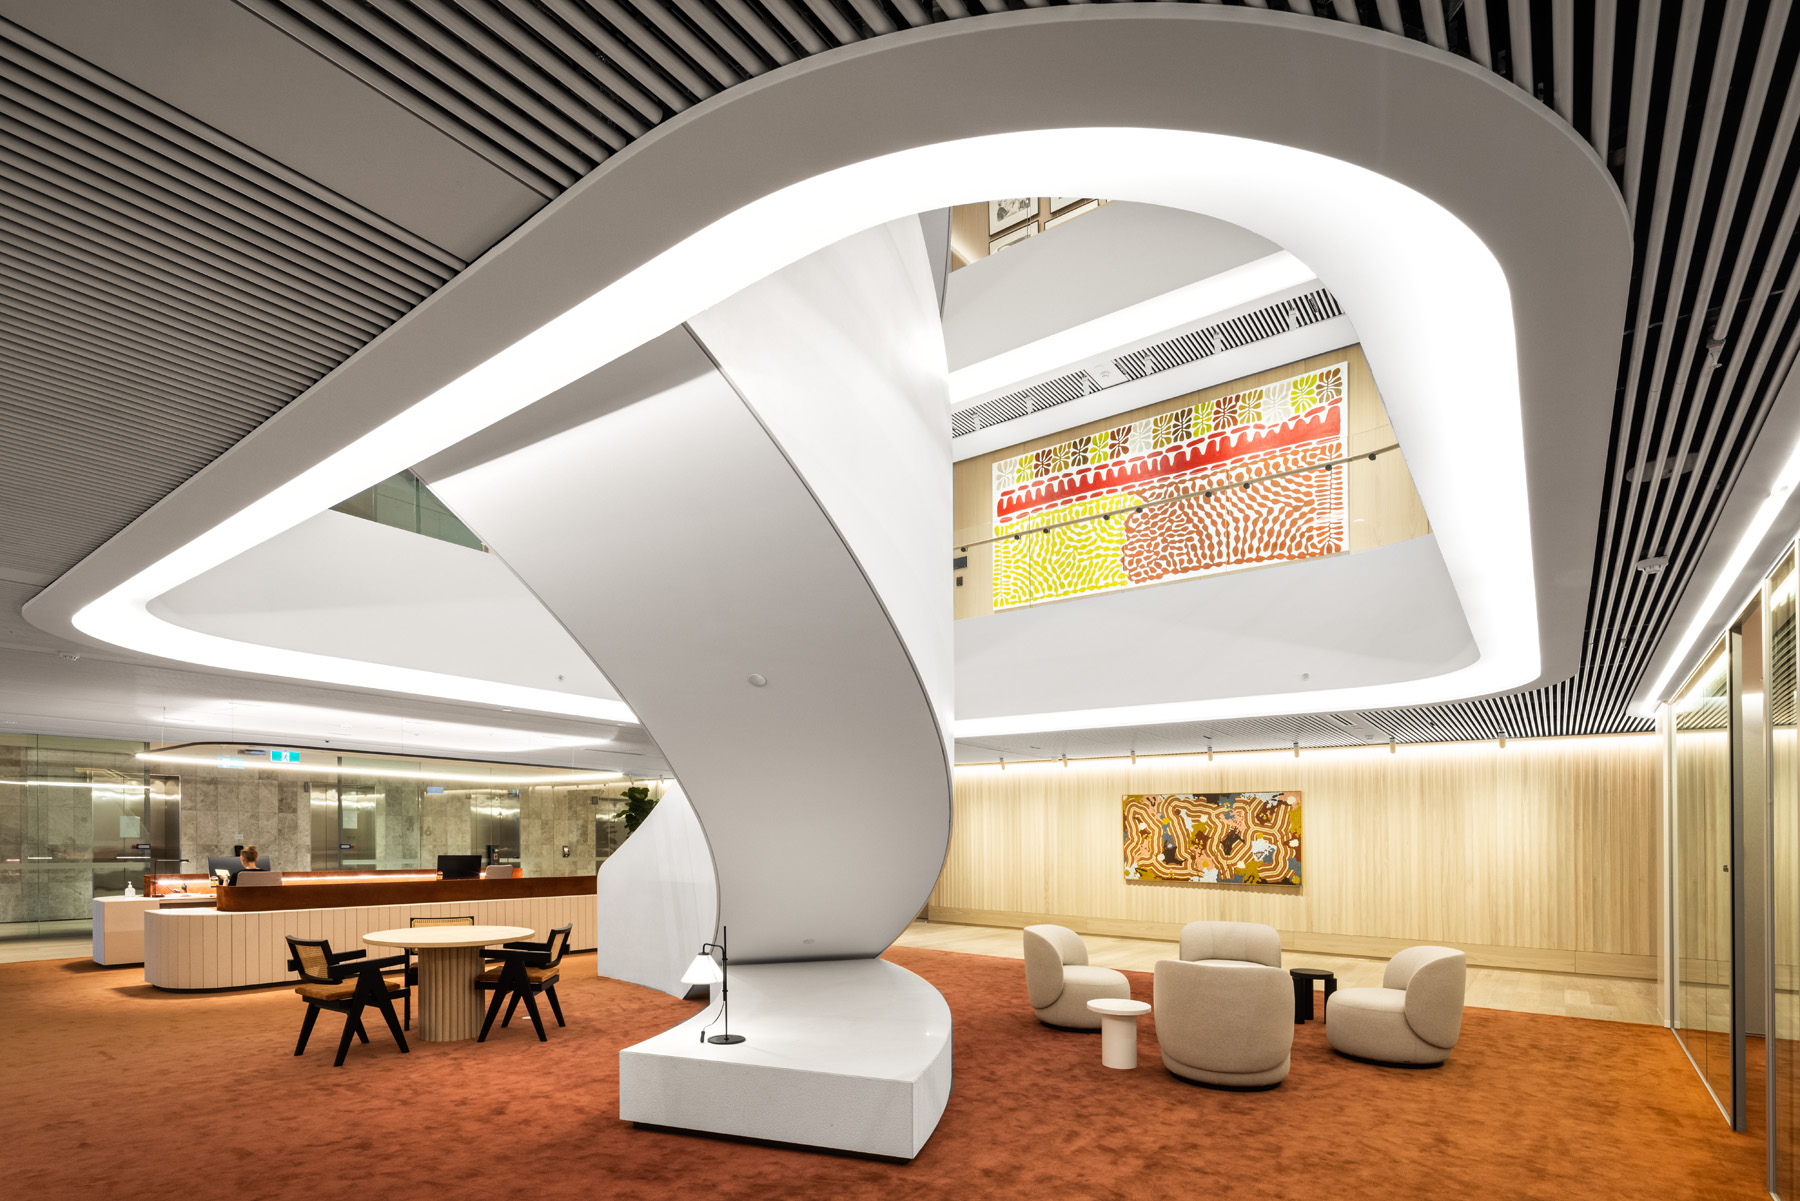 An office lobby with modern interiors and lighting